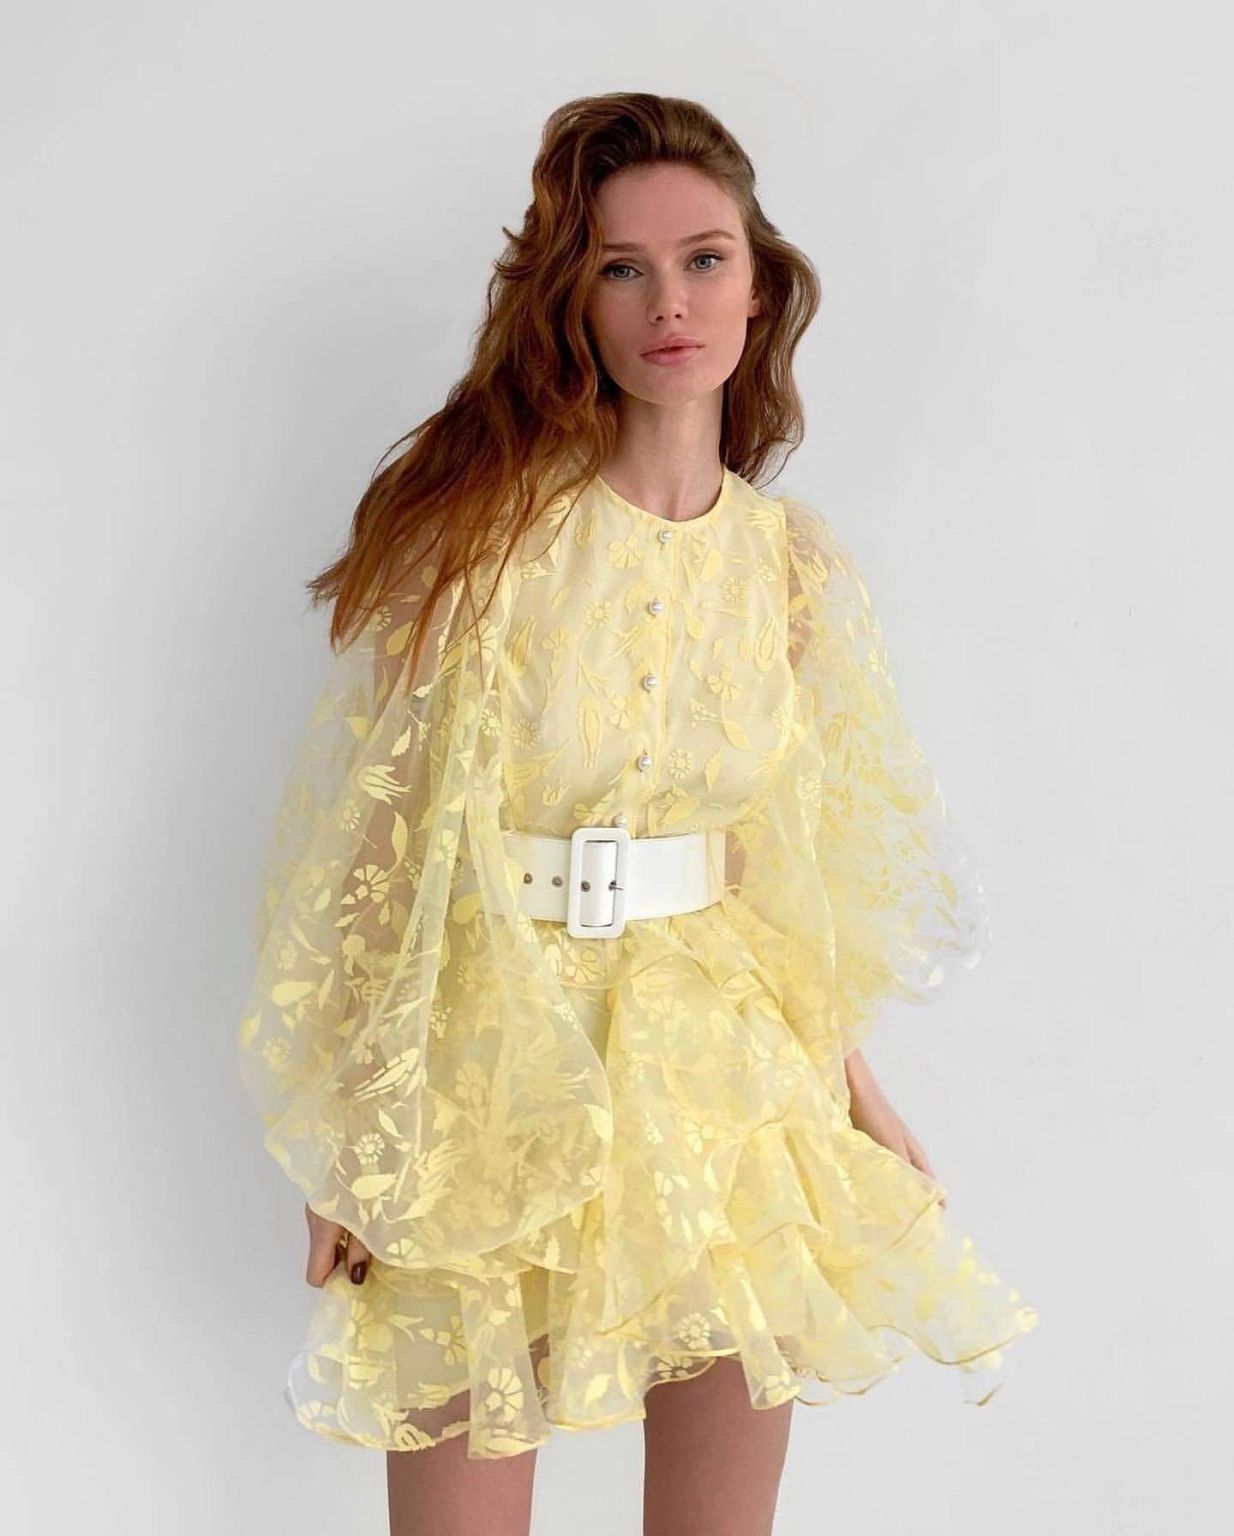 Yellow Dresses: 140+ Ideas How to Wear a Yellow Dress - LadyLife